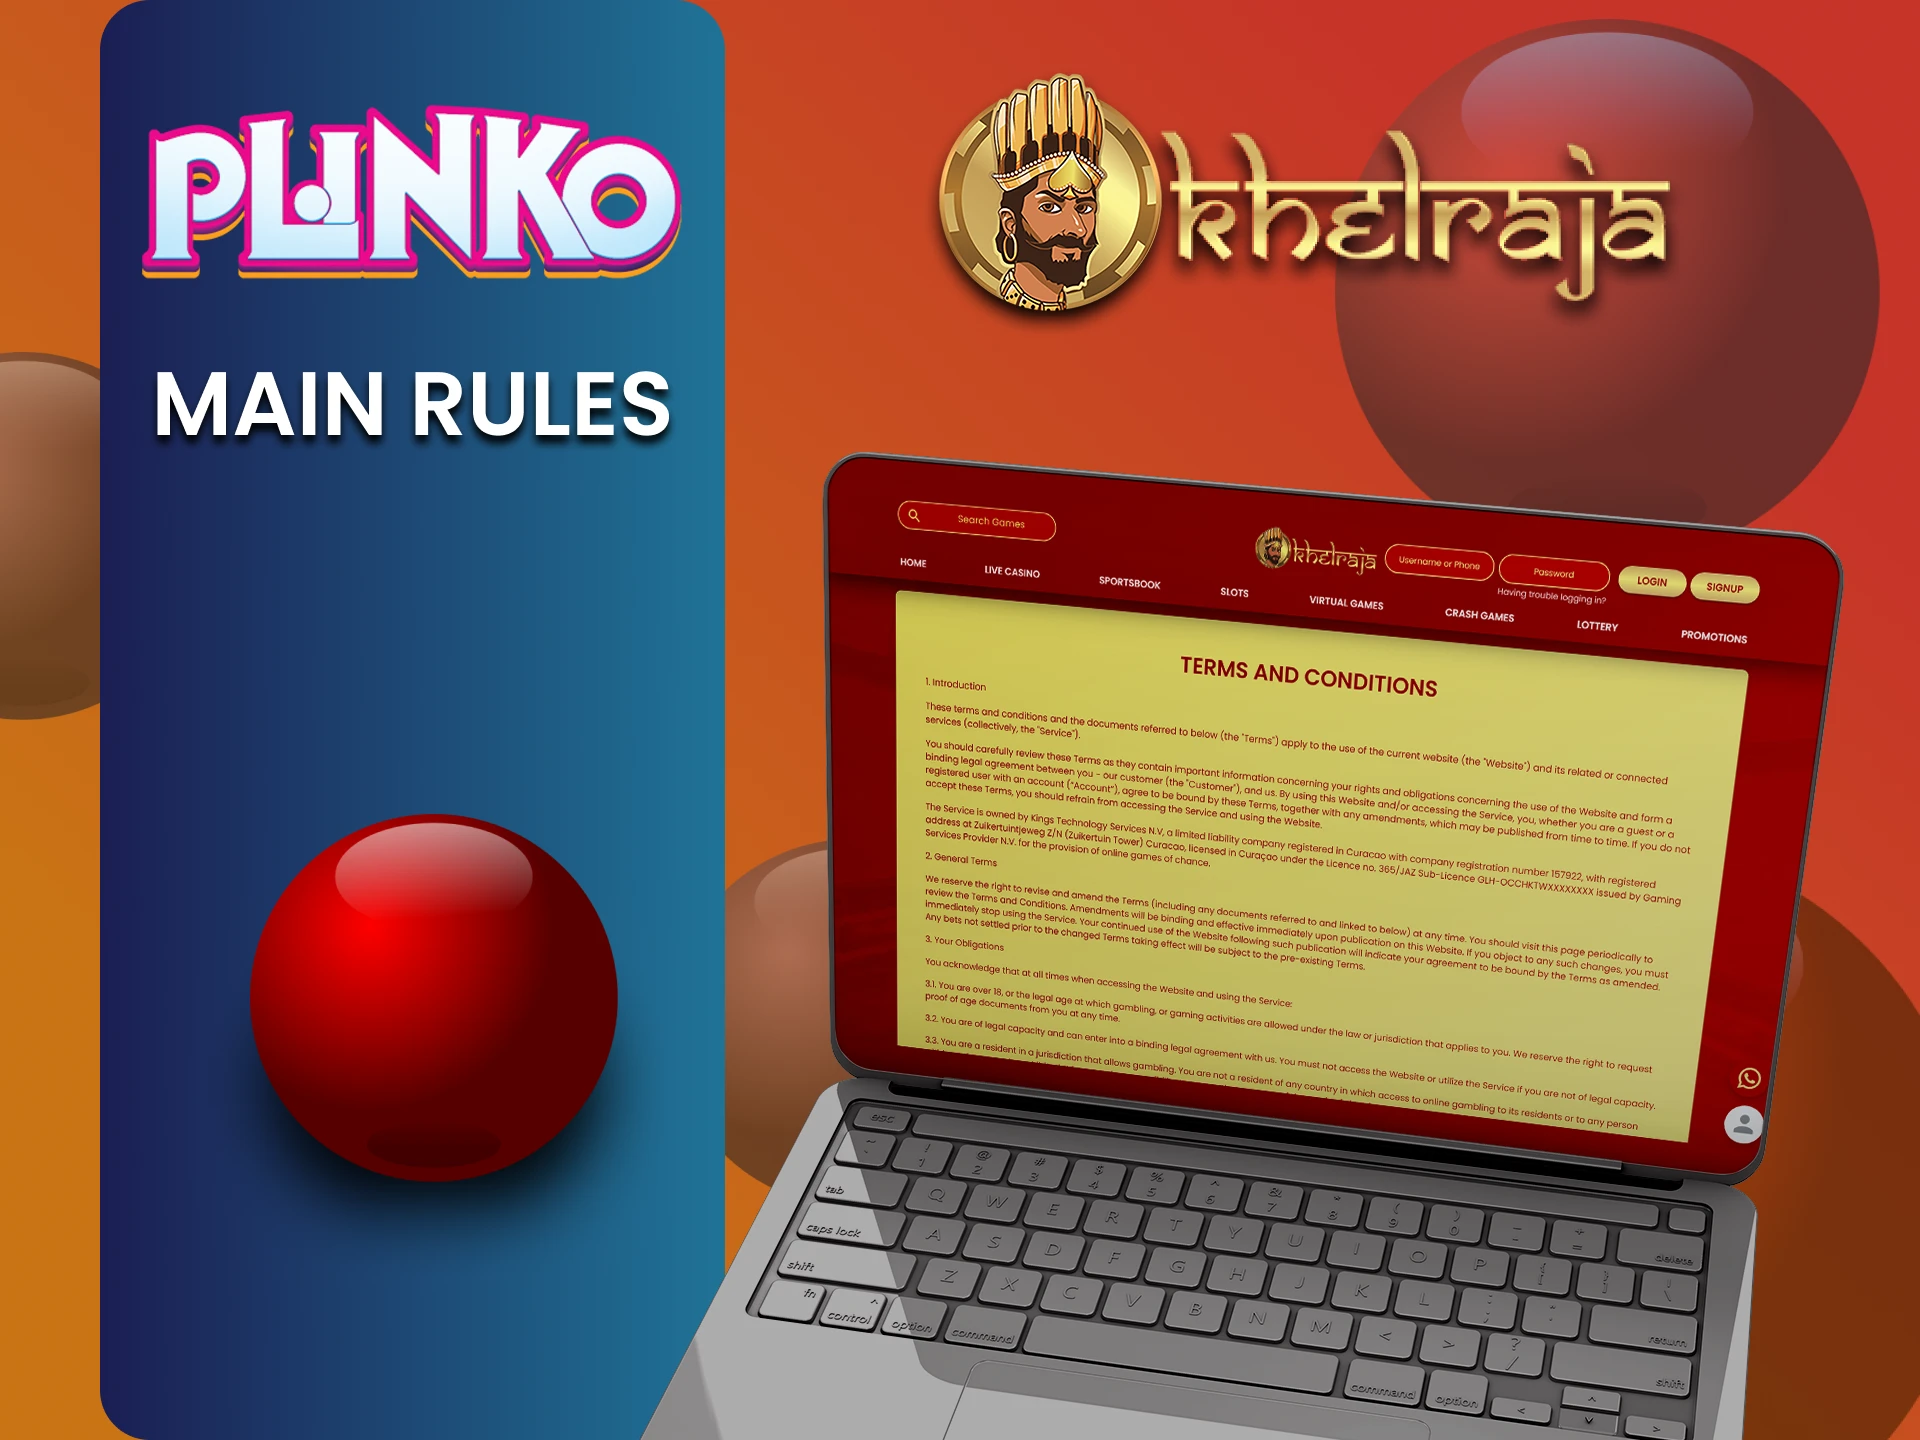 The Khelraja website has specific rules for playing Plinko.